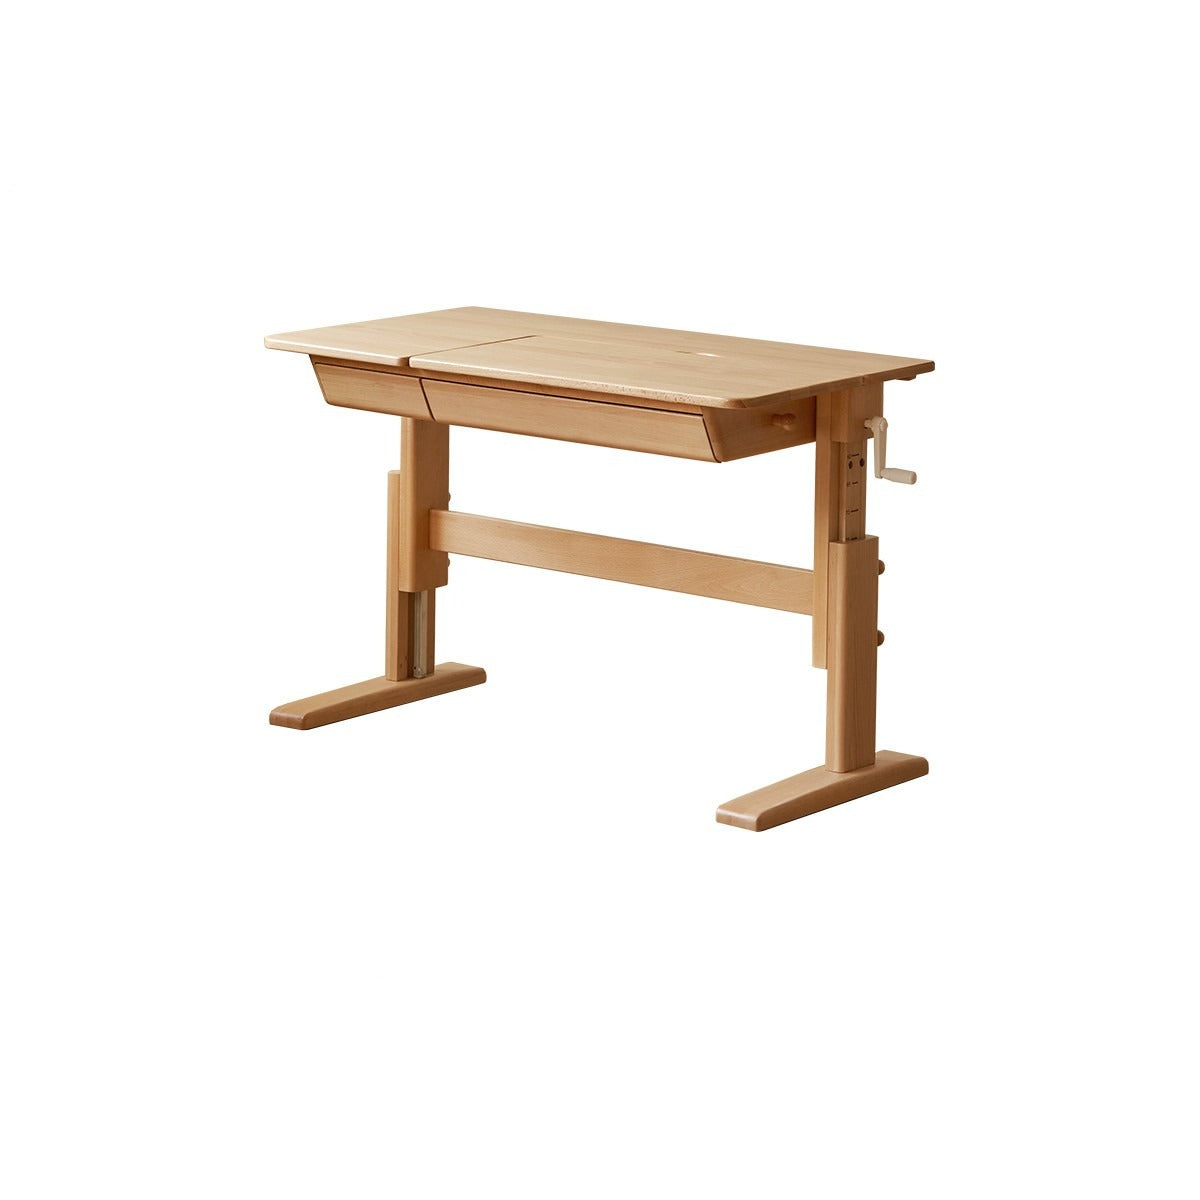 Beech Solid Wood lifting kids table with self/chair/high shelf"